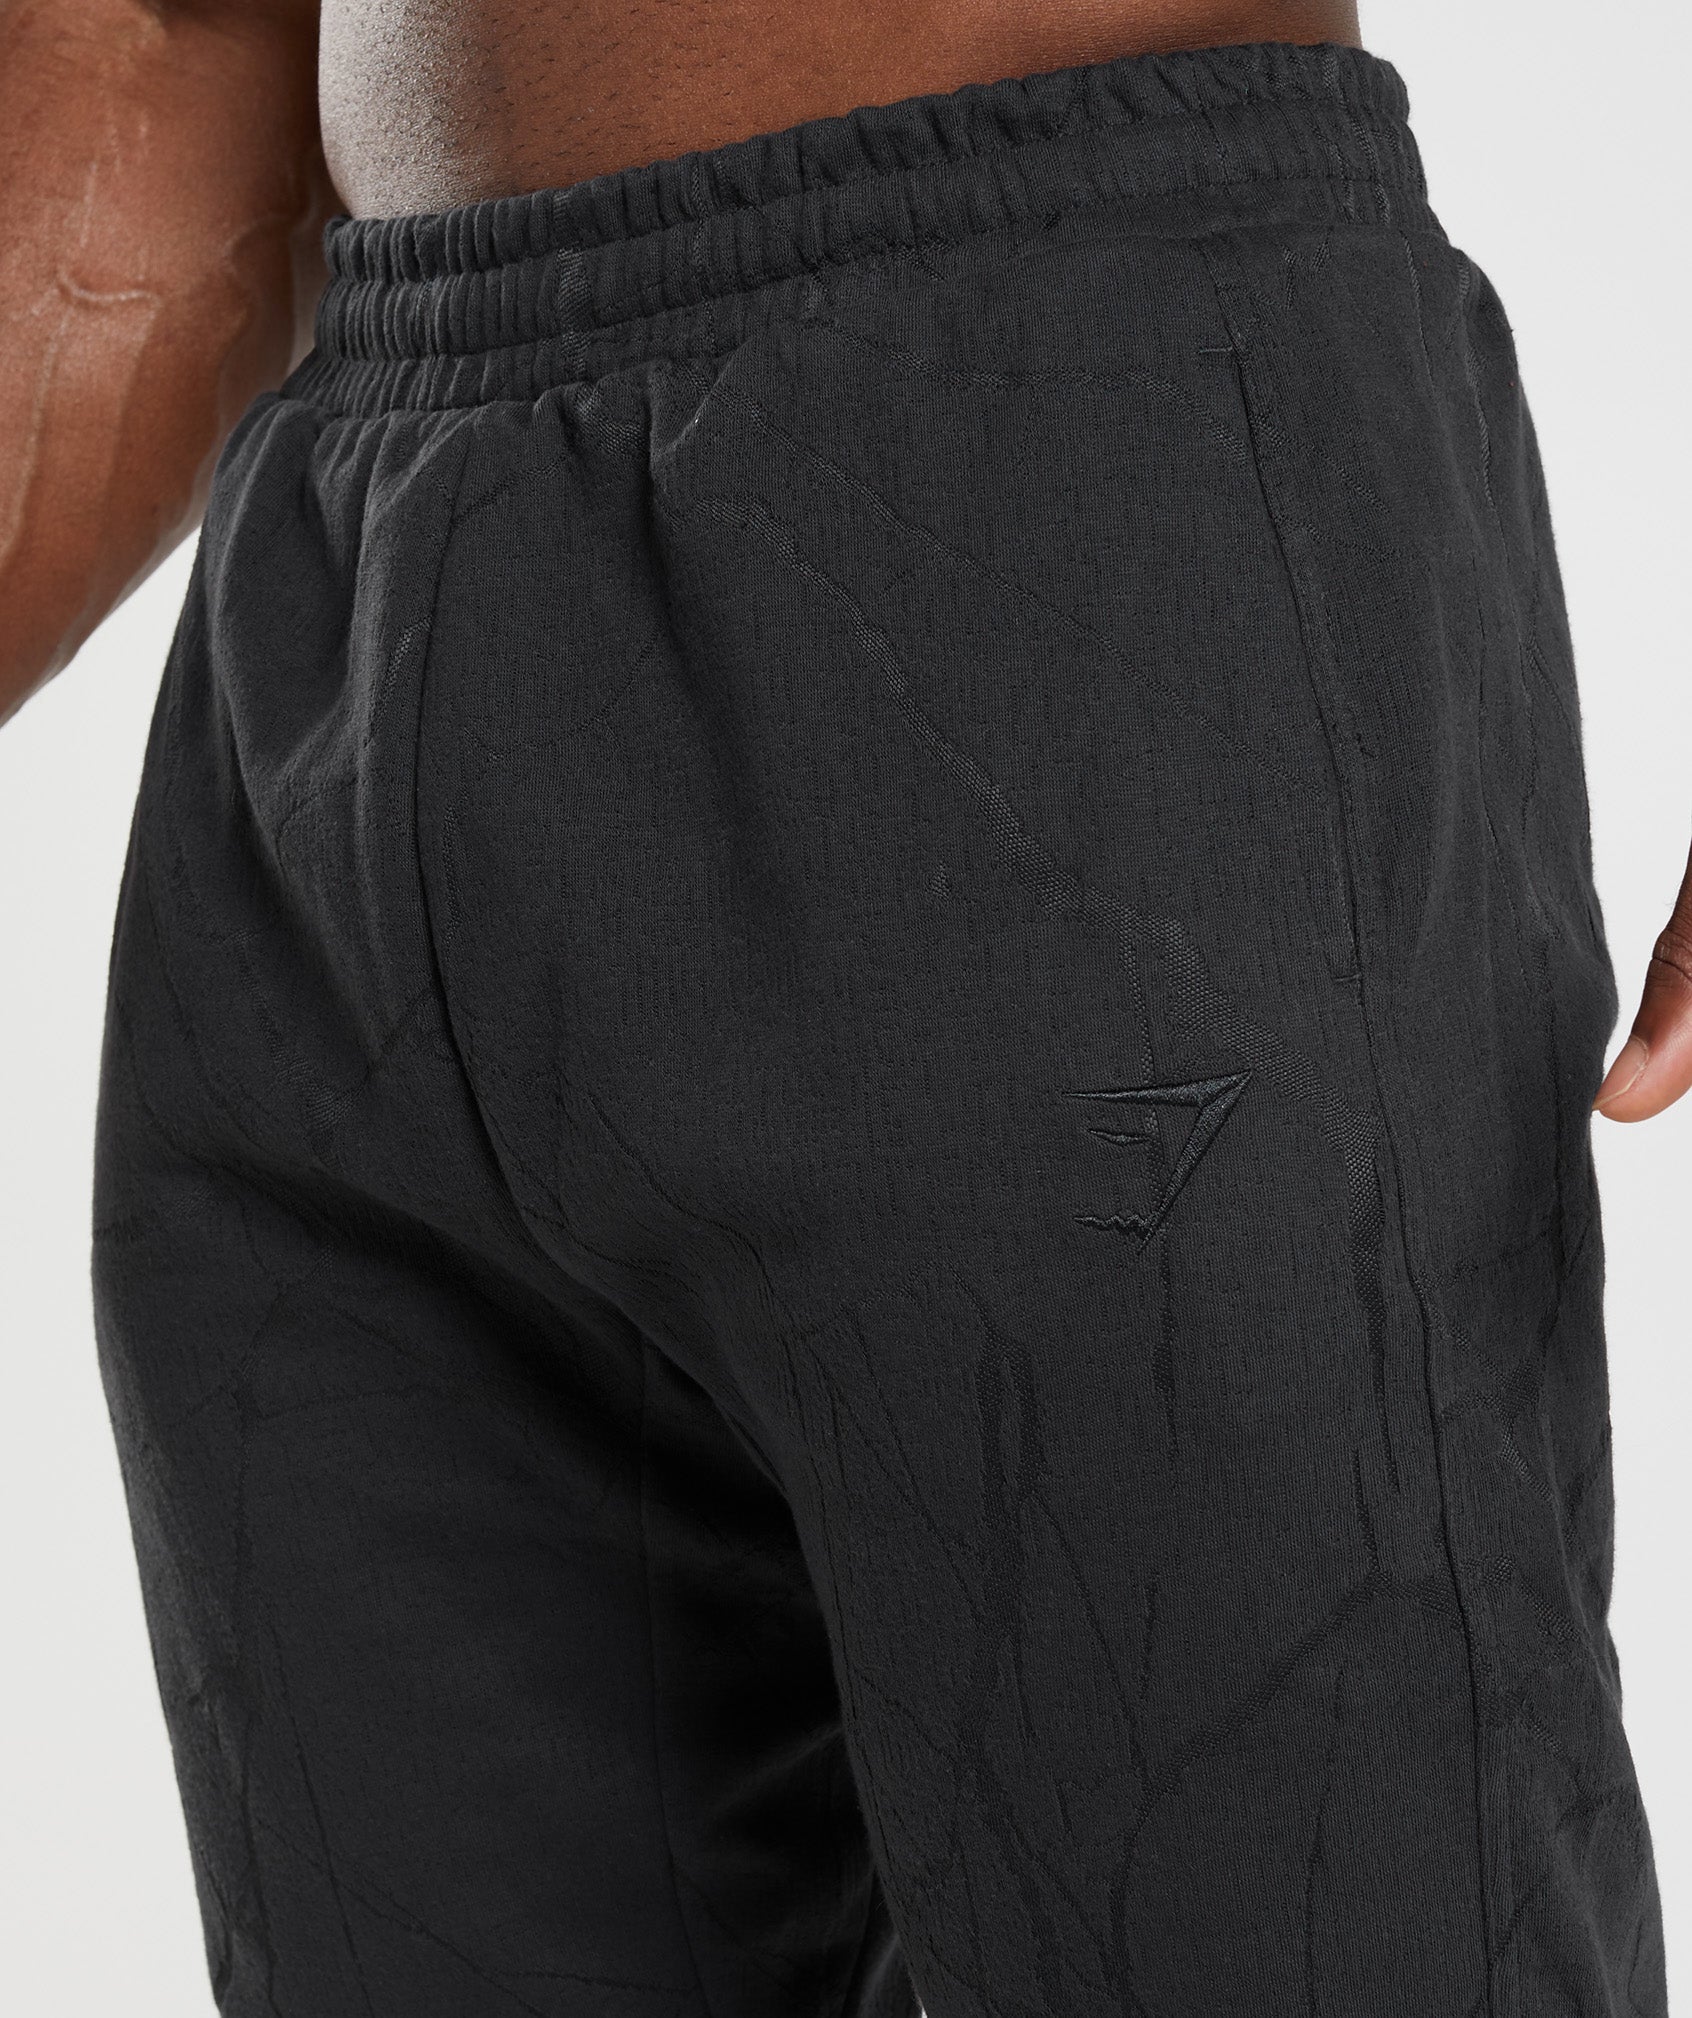 Power Joggers in Black Print - view 5